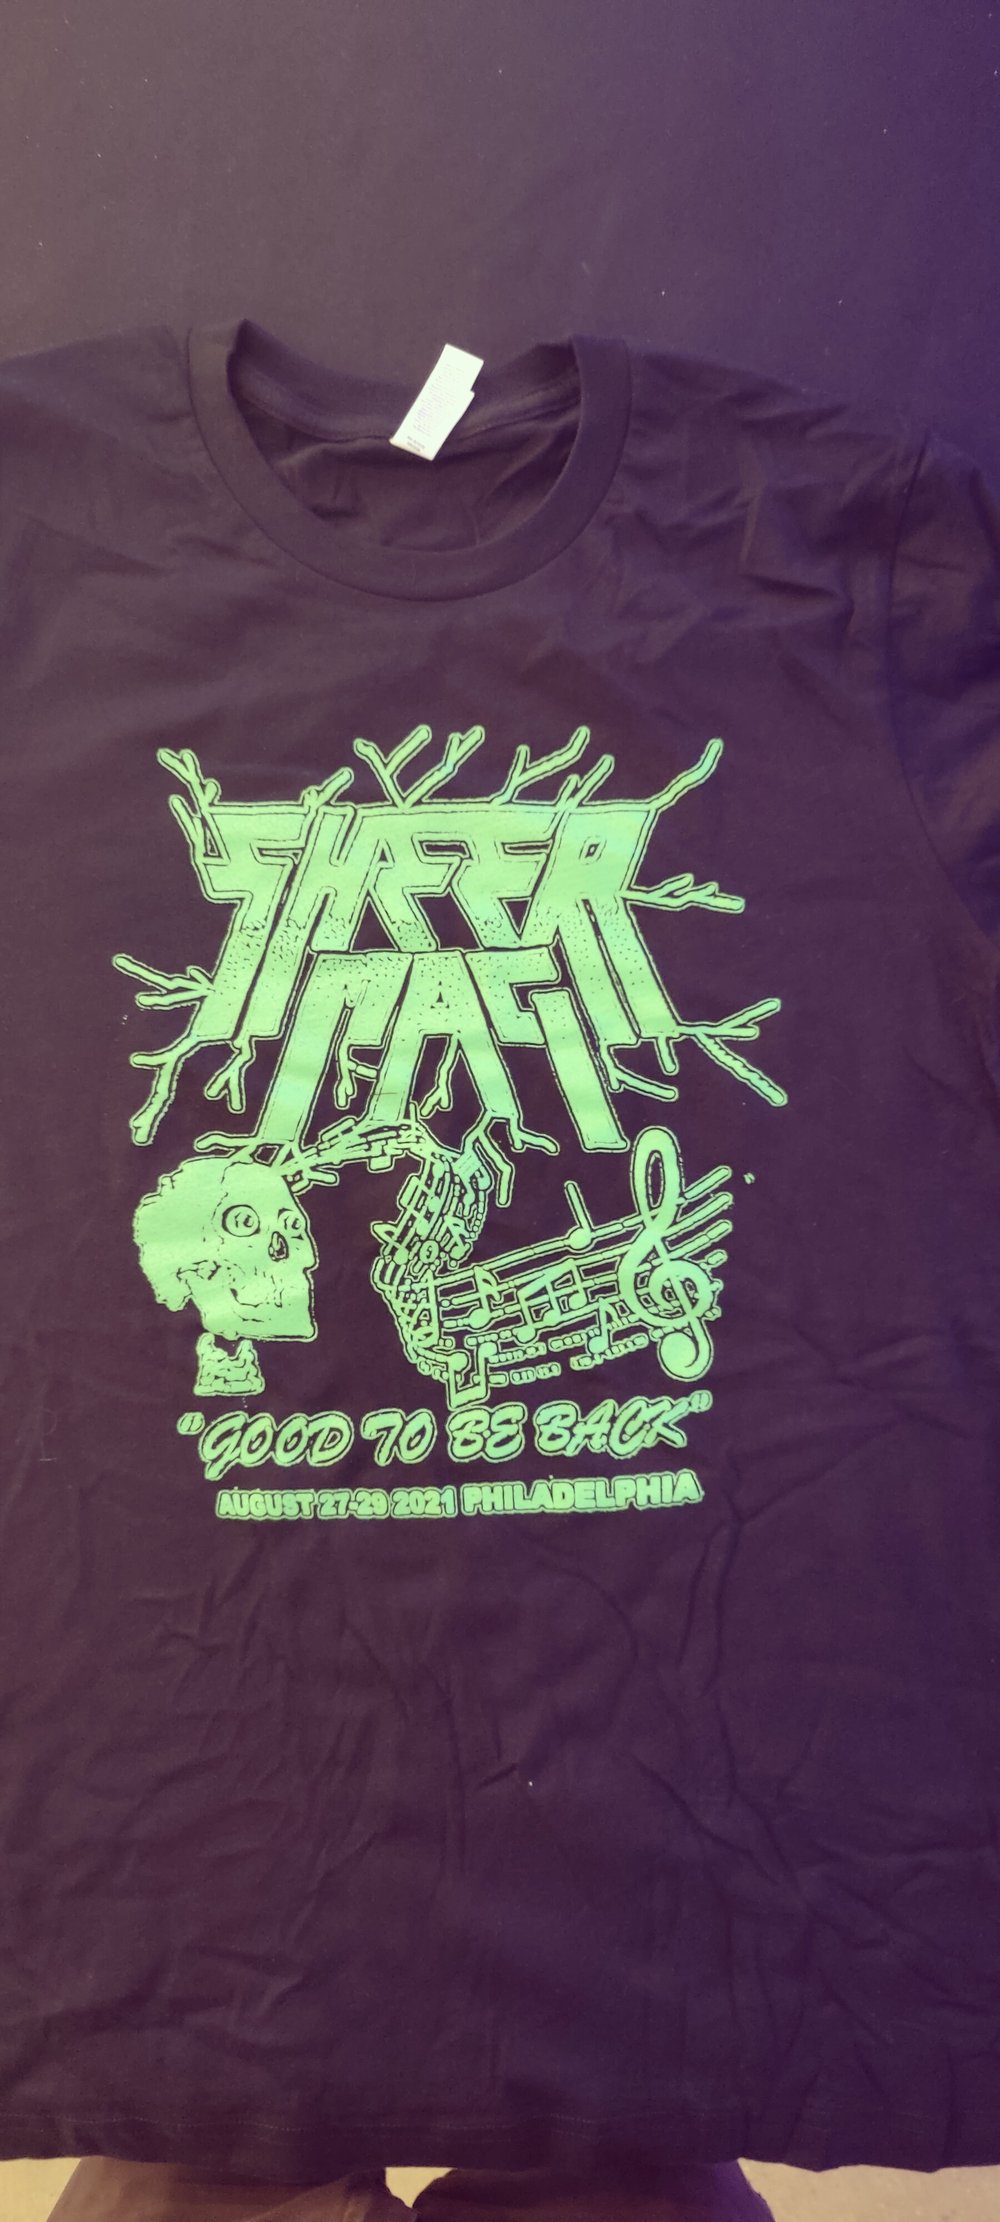 SHEER MAG - GOOD TO BE BACK *** PHILLY LIMITED EDITION SHIRT *** 